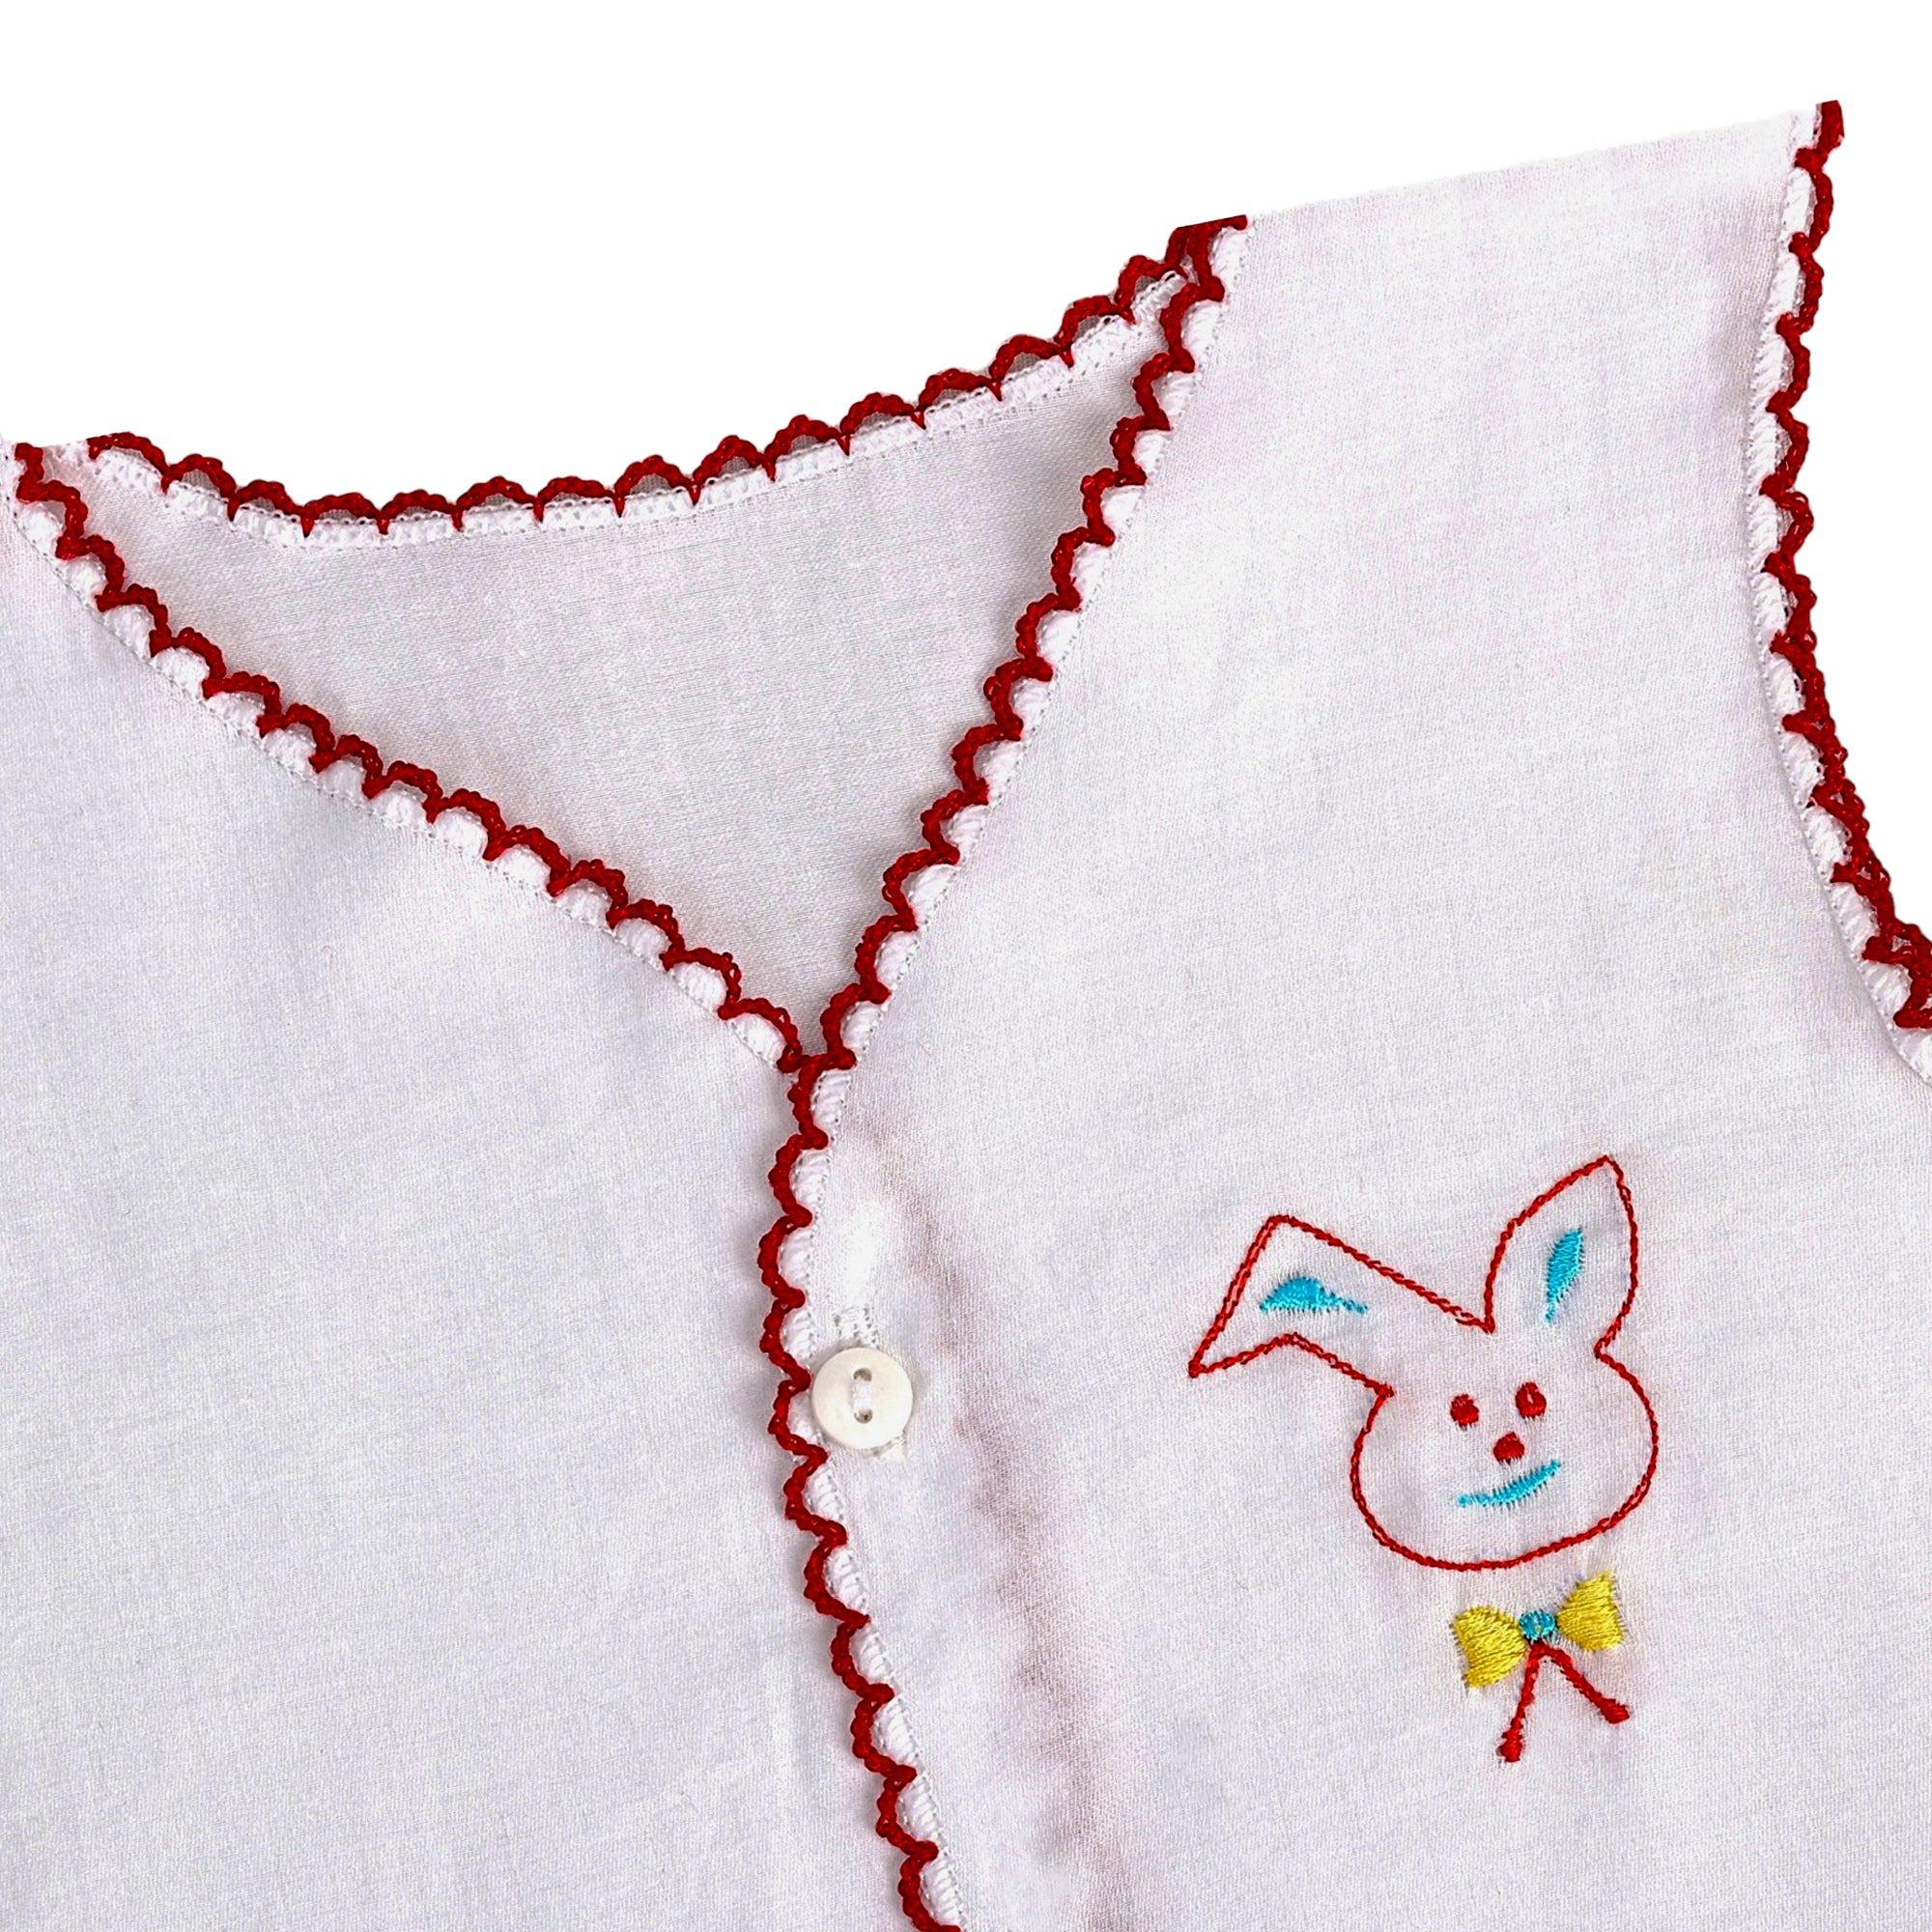 Baby Moo Animal Embroidery V-Neck Sleeveless Front Opening Button Cotton Jhablas 5 Pcs - Multicolour, White